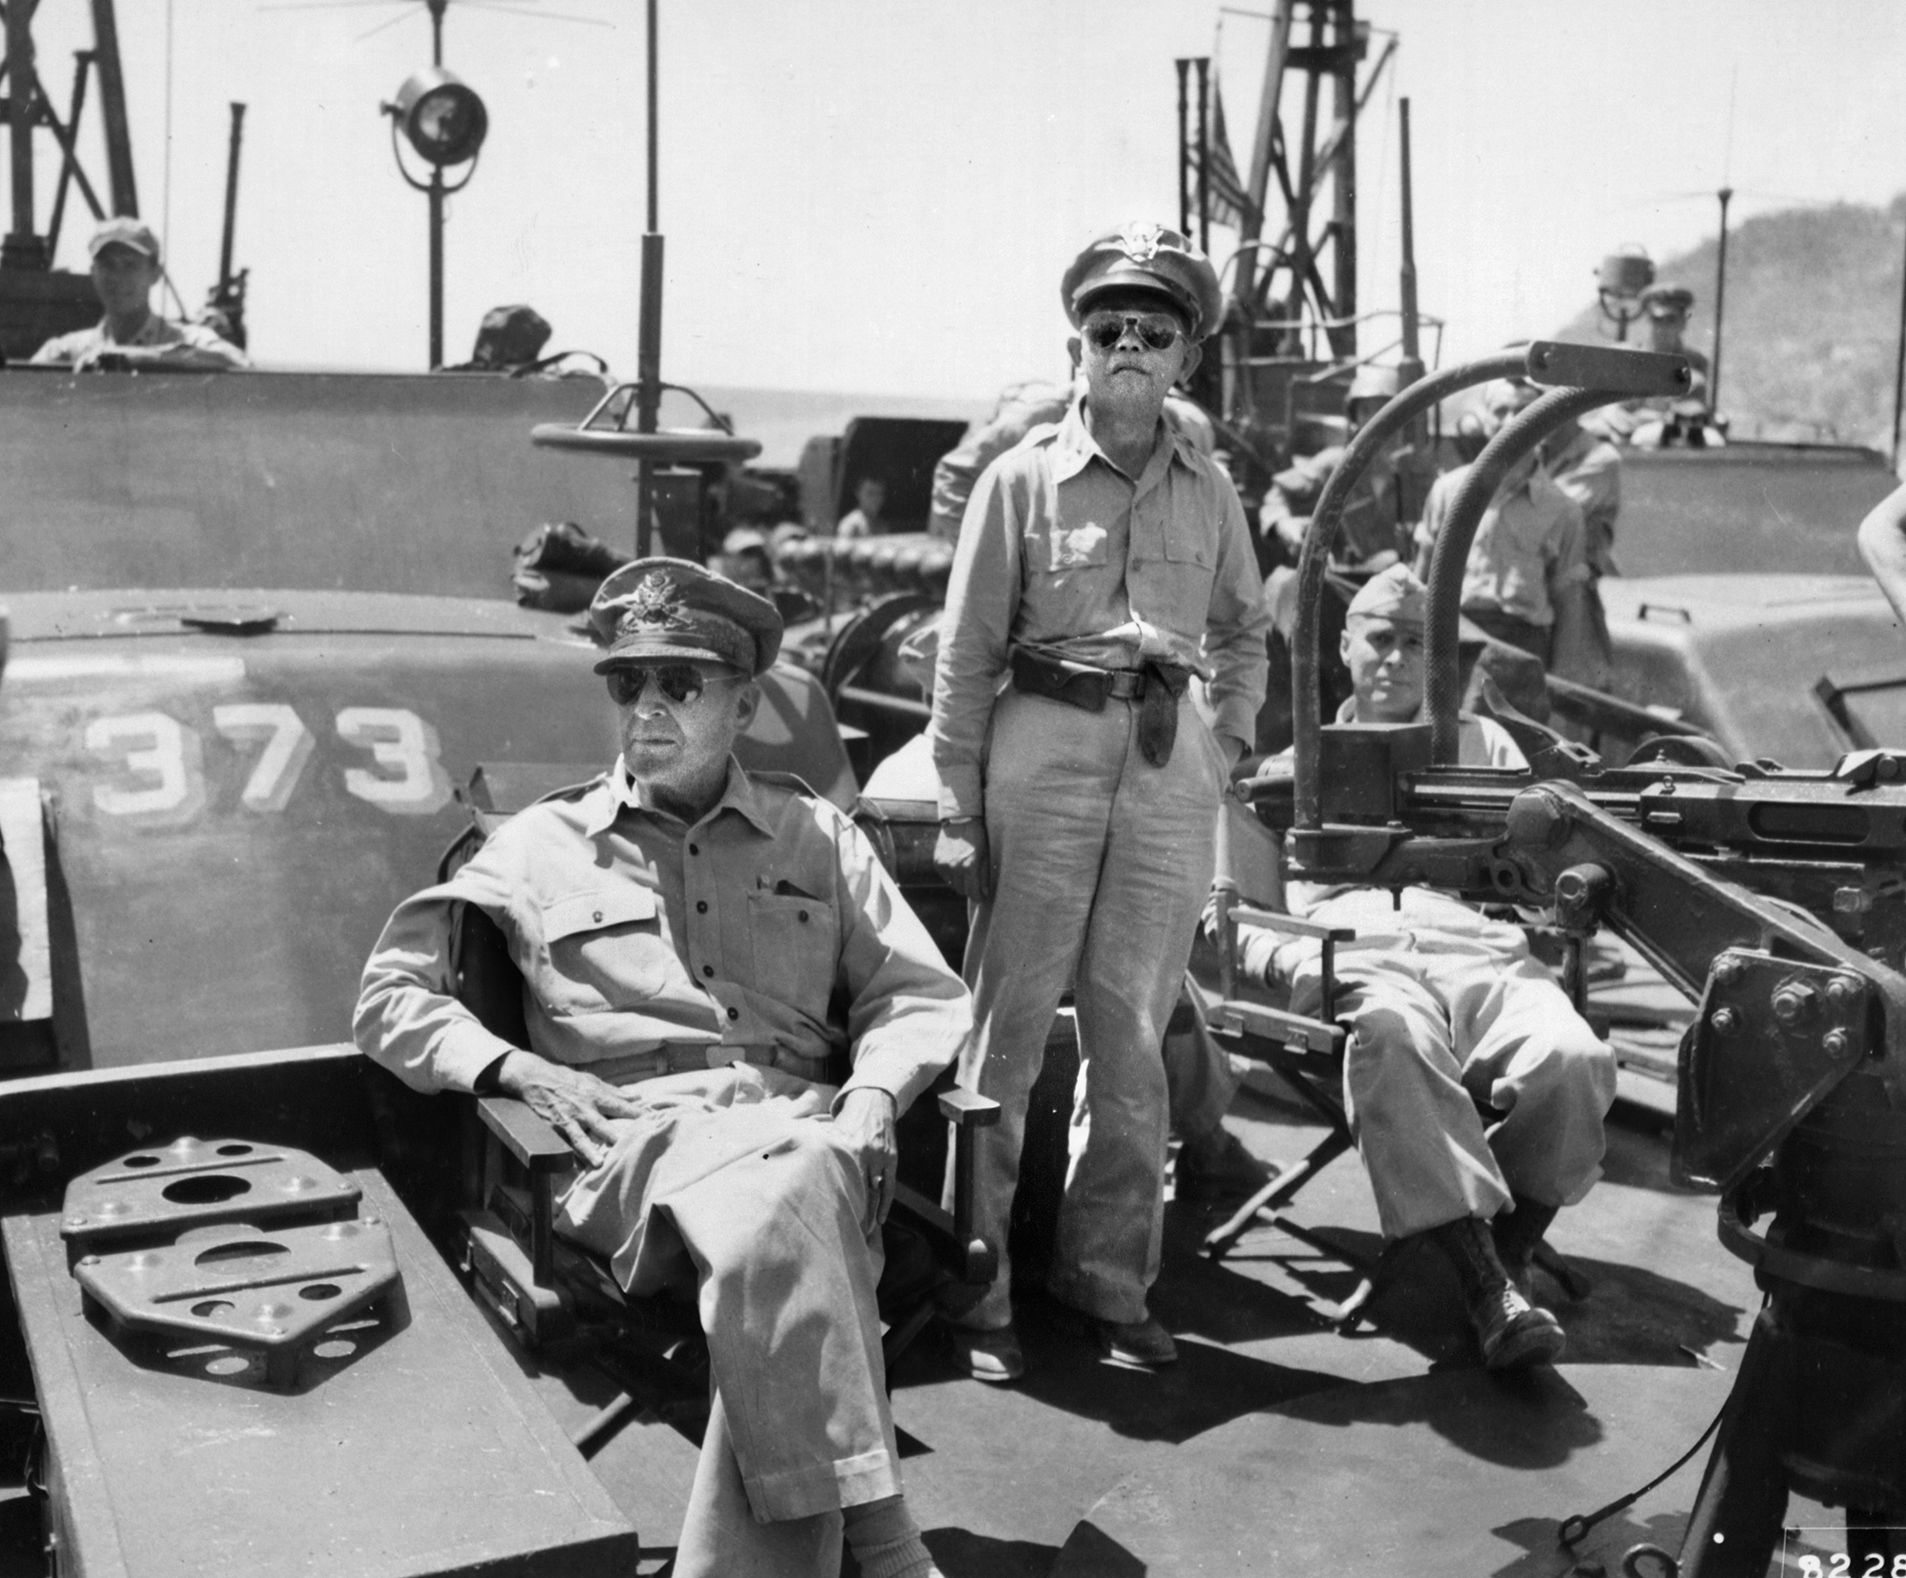 General Douglas MacArthur pauses after fulfilling his promise to return to the Philippines. MacArthur is seen aboard PT-373 at a wrecked dock on the island of Corregidor in Manila Bay. He is accompanied by Brigadier General Carlos P. Romulo, commander of the Philippine Forces of Liberation. 